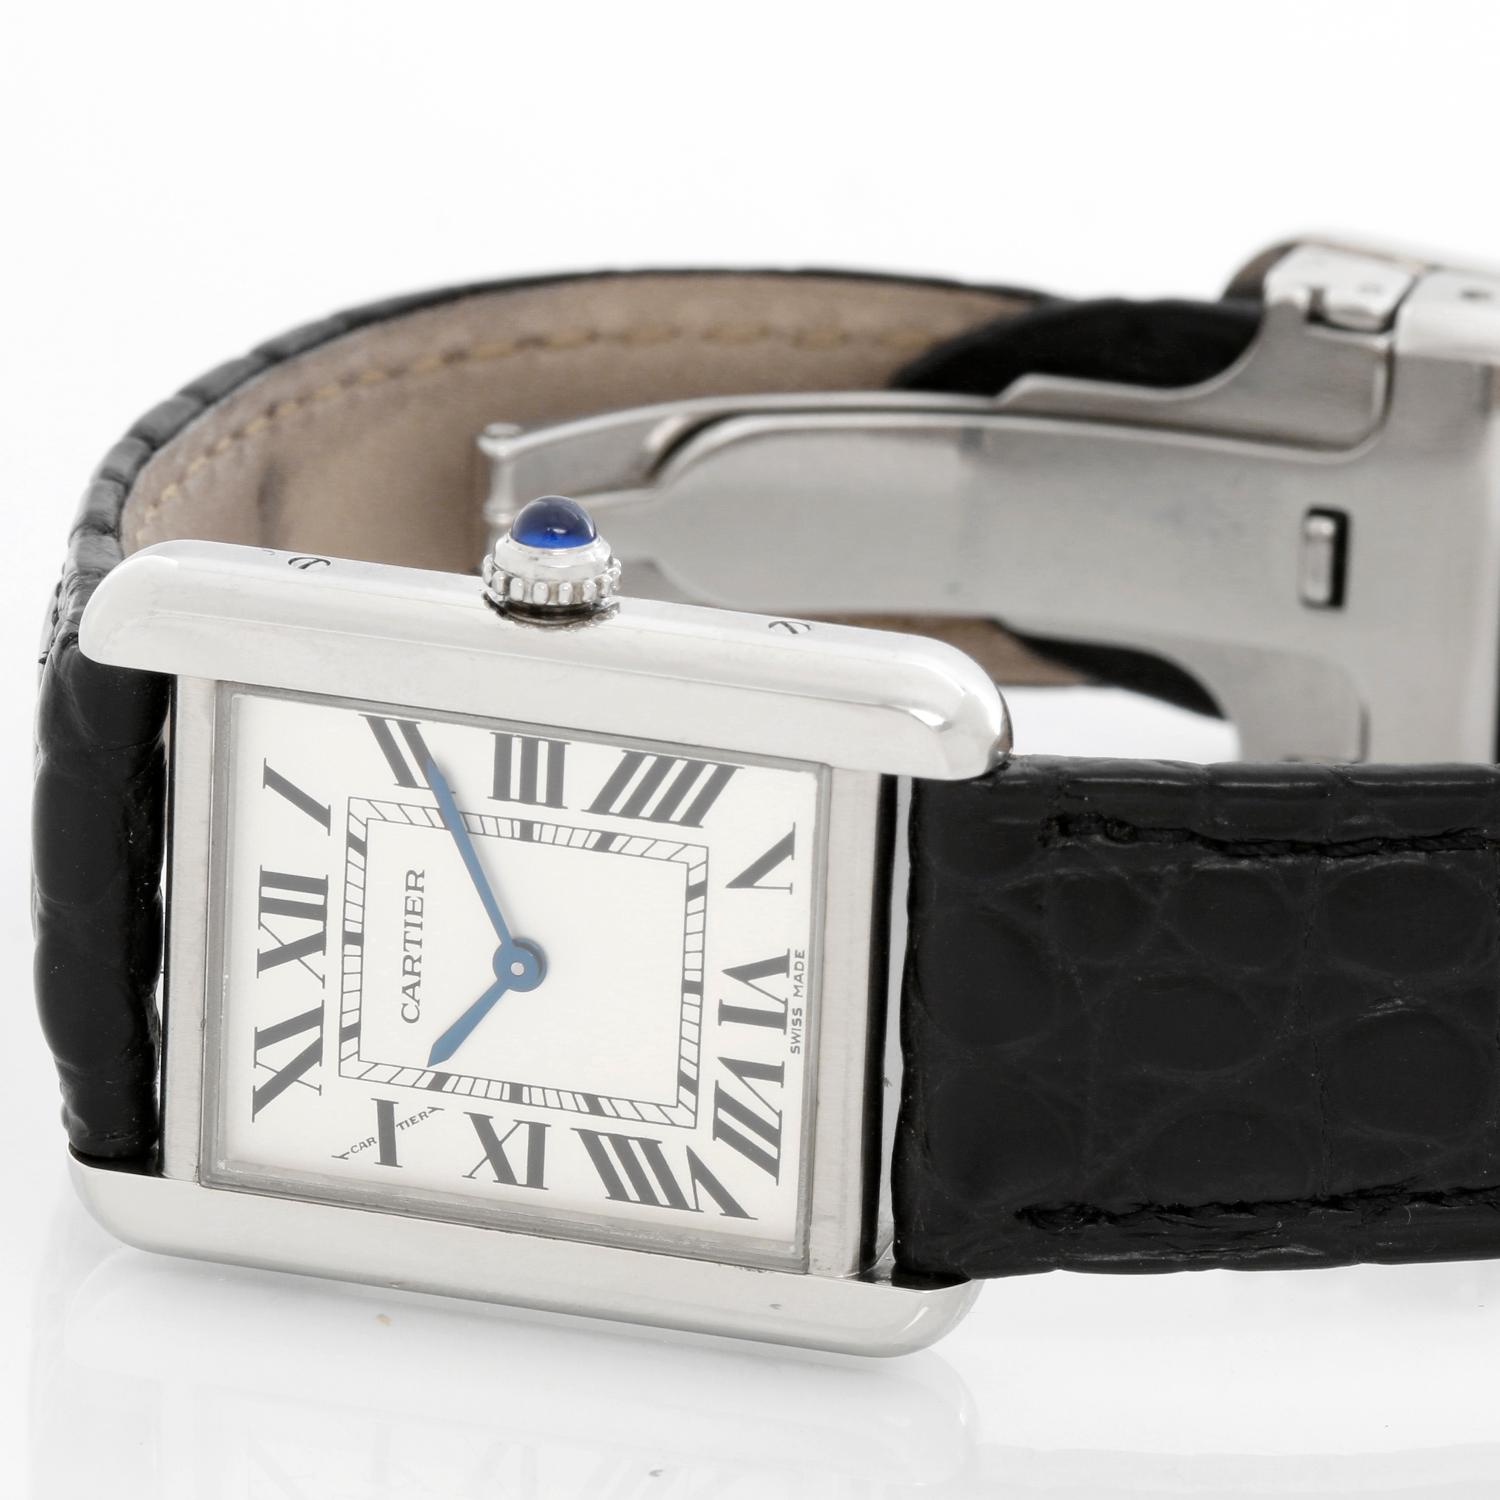 Cartier Tank Solo Stainless Steel Ladies Watch W520005 - Quartz. Stainless steel case (24mm x 30mm). Silver dial with black Roman numerals. Black strap band with Cartier deployant buckle . Pre-owned with Cartier papers